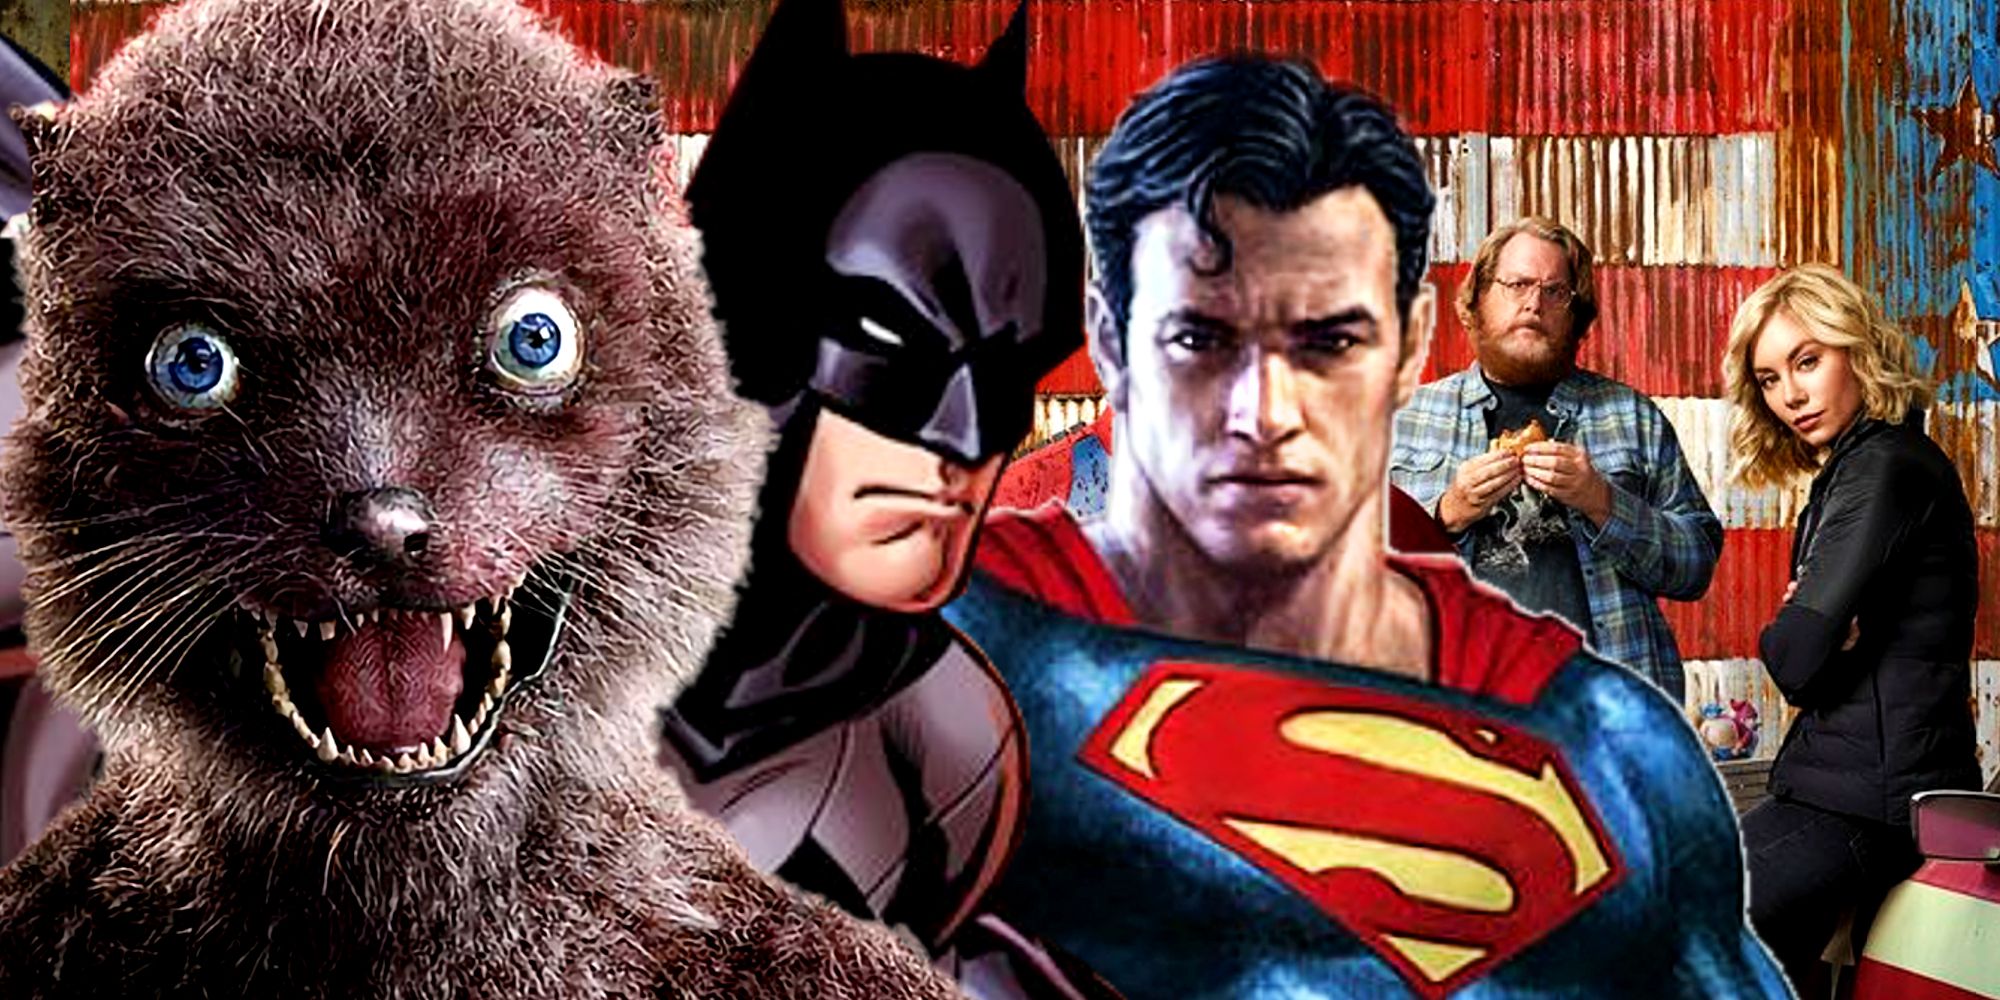 James Gunn's Peacemaker and Weasel with Batman and Superman